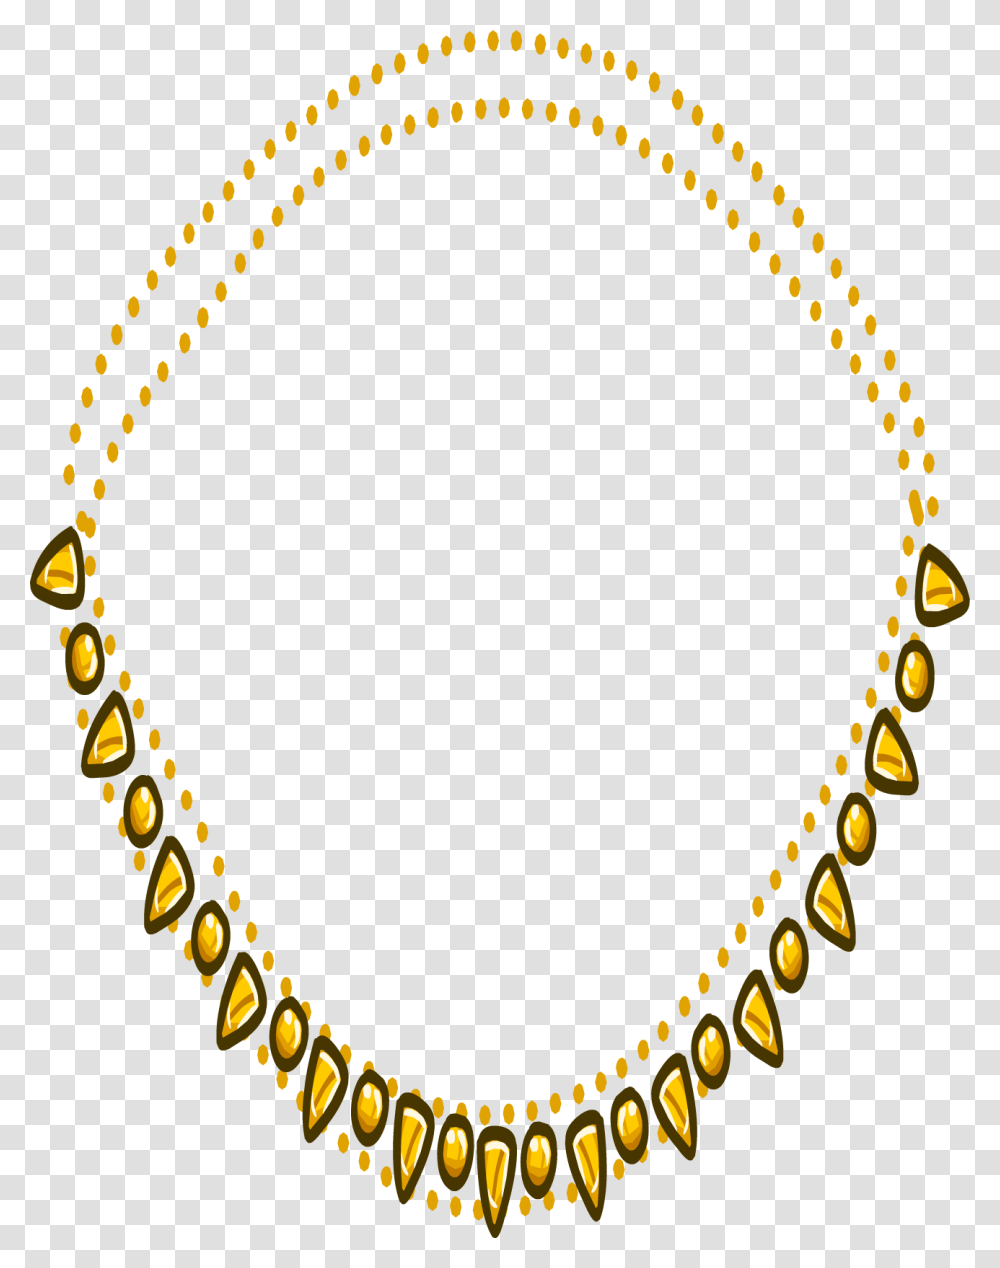 Image Gold Icon Gold Necklace Club Penguin, Chain, Jewelry, Accessories, Accessory Transparent Png